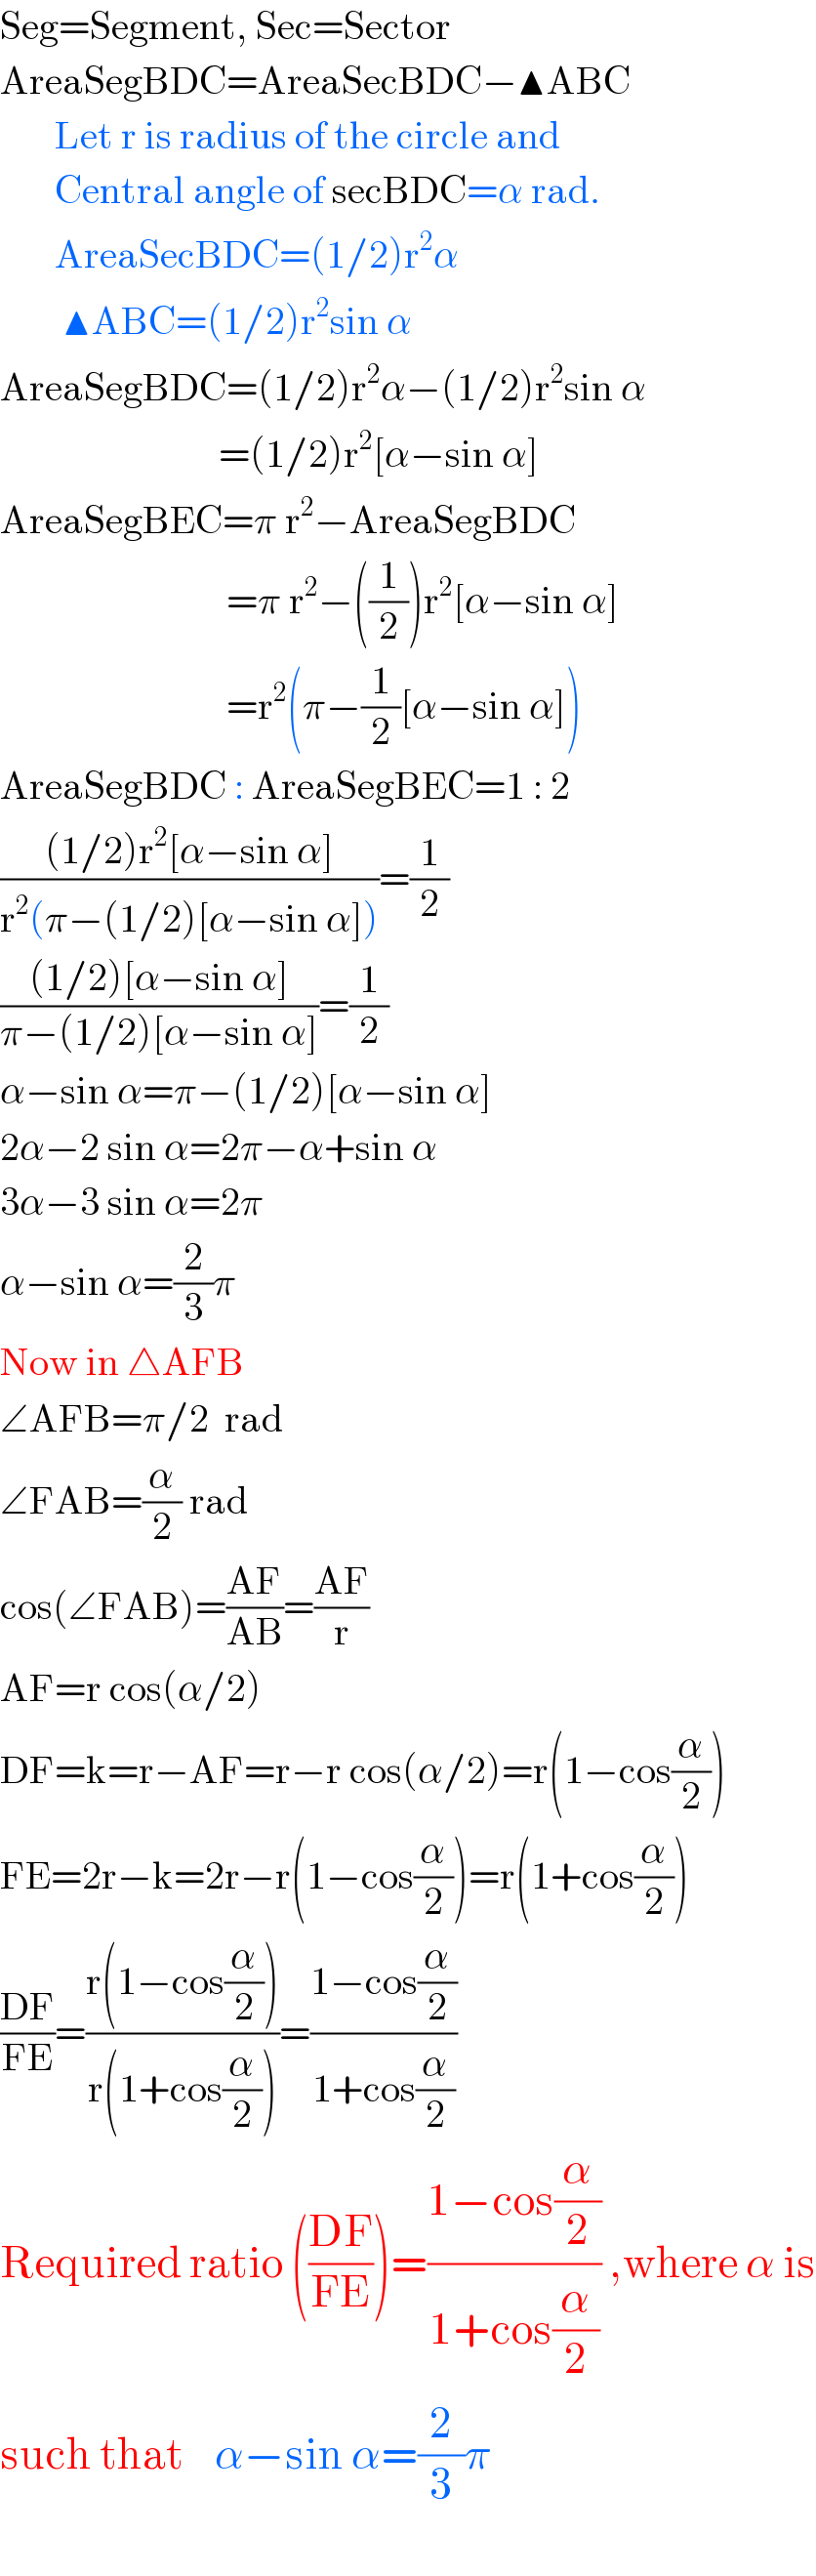 Seg=Segment, Sec=Sector  AreaSegBDC=AreaSecBDC−▲ABC         Let r is radius of the circle and         Central angle of secBDC=α rad.         AreaSecBDC=(1/2)r^2 α          ▲ABC=(1/2)r^2 sin α  AreaSegBDC=(1/2)r^2 α−(1/2)r^2 sin α                              =(1/2)r^2 [α−sin α]  AreaSegBEC=π r^2 −AreaSegBDC                               =π r^2 −((1/2))r^2 [α−sin α]                               =r^2 (π−(1/2)[α−sin α])  AreaSegBDC : AreaSegBEC=1 : 2  (((1/2)r^2 [α−sin α])/(r^2 (π−(1/2)[α−sin α])))=(1/2)  (((1/2)[α−sin α])/(π−(1/2)[α−sin α]))=(1/2)  α−sin α=π−(1/2)[α−sin α]  2α−2 sin α=2π−α+sin α  3α−3 sin α=2π  α−sin α=(2/3)π  Now in △AFB  ∠AFB=π/2  rad  ∠FAB=(α/2) rad  cos(∠FAB)=((AF)/(AB))=((AF)/r)  AF=r cos(α/2)  DF=k=r−AF=r−r cos(α/2)=r(1−cos(α/2))  FE=2r−k=2r−r(1−cos(α/2))=r(1+cos(α/2))  ((DF)/(FE))=((r(1−cos(α/2)))/(r(1+cos(α/2))))=((1−cos(α/2))/(1+cos(α/2)))  Required ratio (((DF)/(FE)))=((1−cos(α/2))/(1+cos(α/2))) ,where α is  such that    α−sin α=(2/3)π    